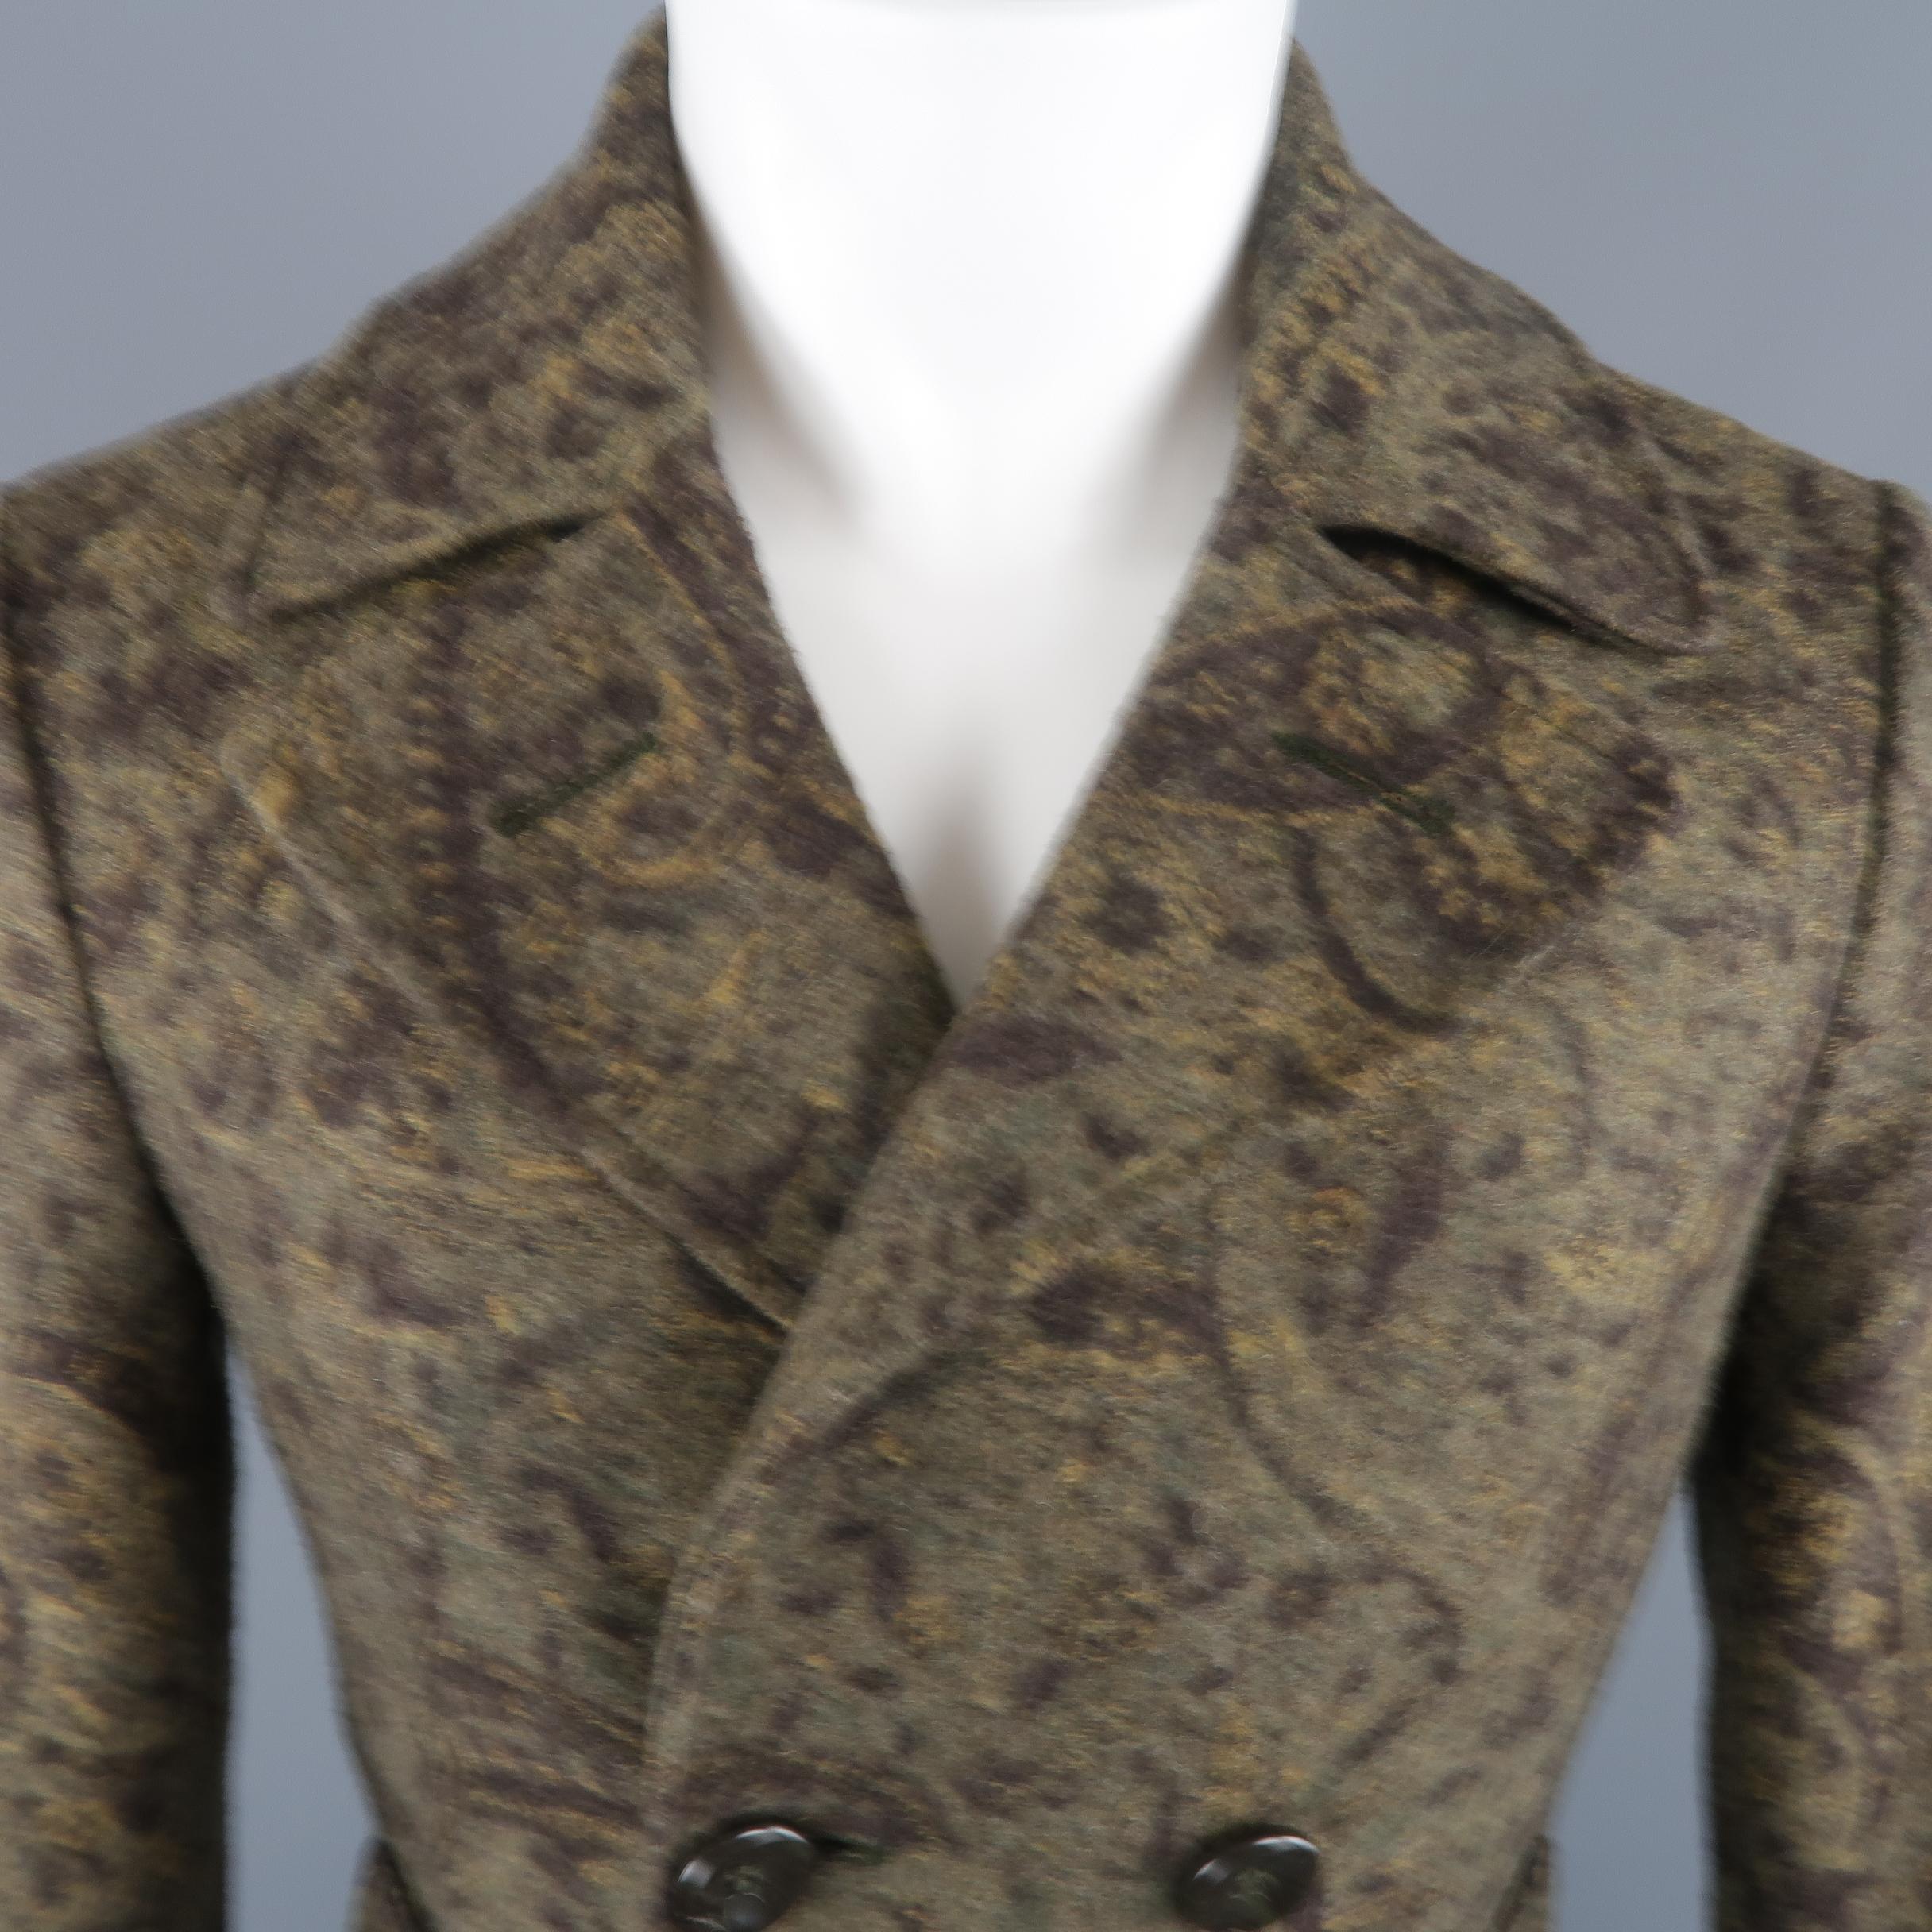 BRIAN DALES pea coat comes in olive wool blend fabric with an all over paisley print, double breasted front, and pointed lapels. Made in Italy.
 
Excellent Pre-Owned Condition.
Marked: IT 46
 
Measurements:
 
Shoulder: 17 in.
Chest: 40 in.
Sleeve: